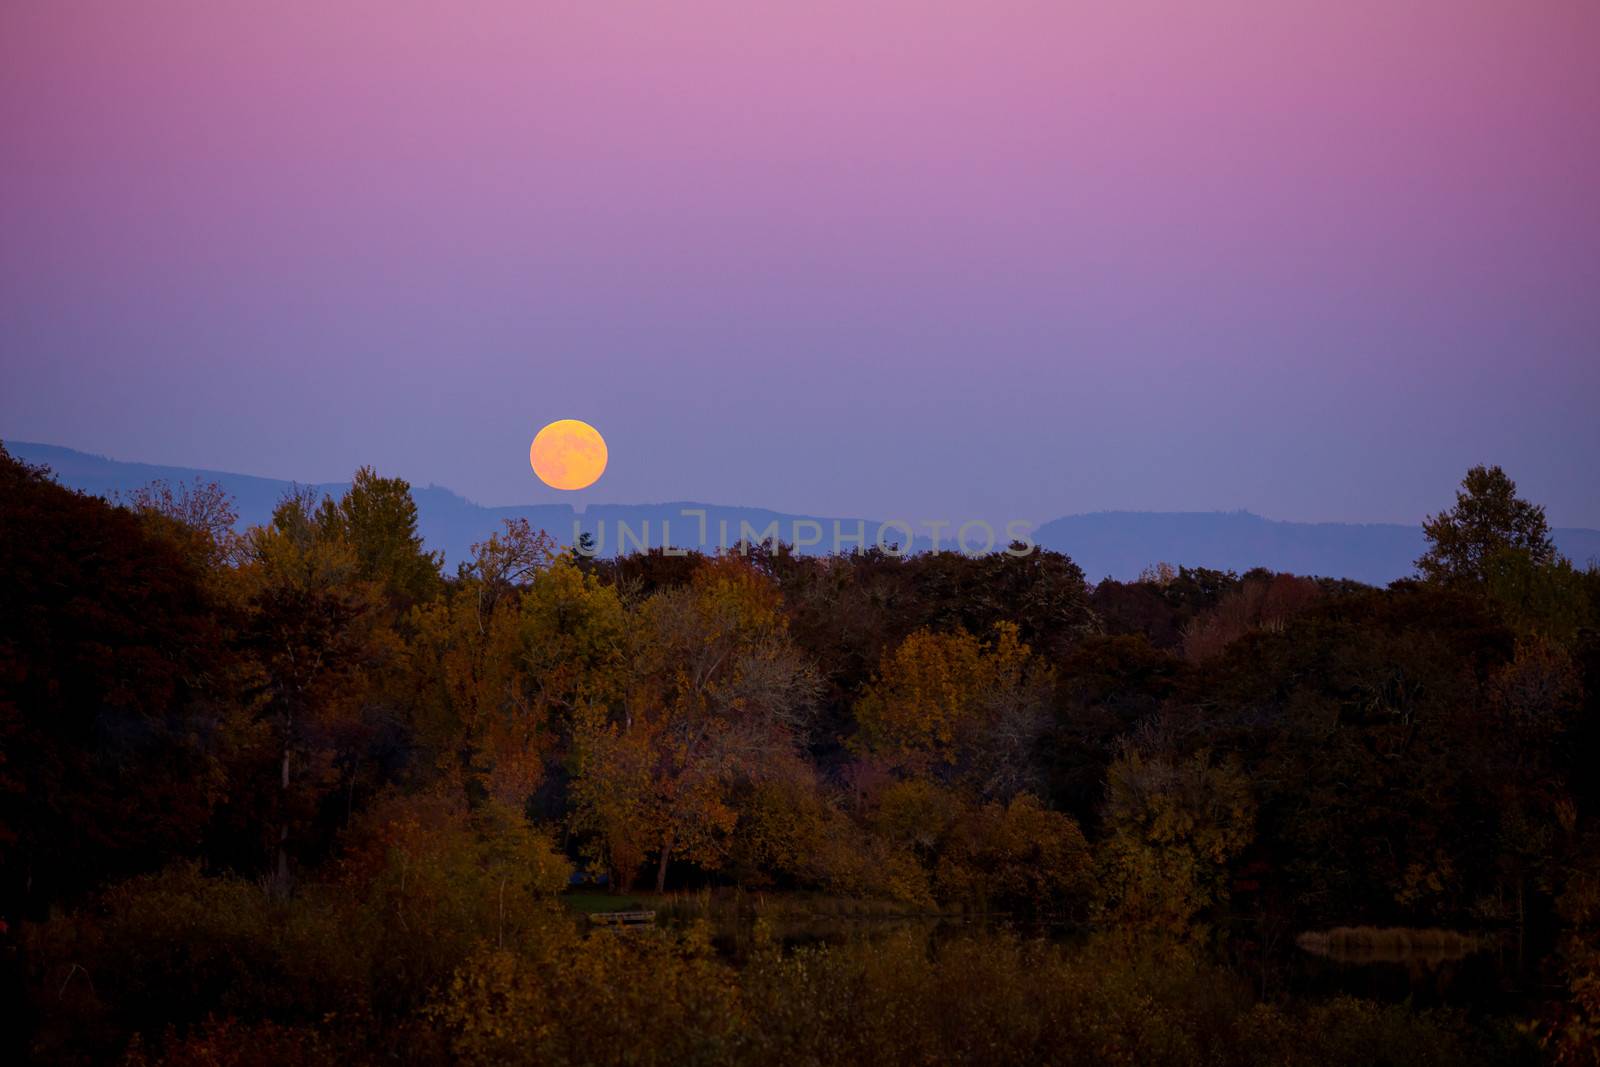 Suring autumn this harvest moon rise over fall leaves color and trees is photographed from far away to show the color and sky along with the landscape.